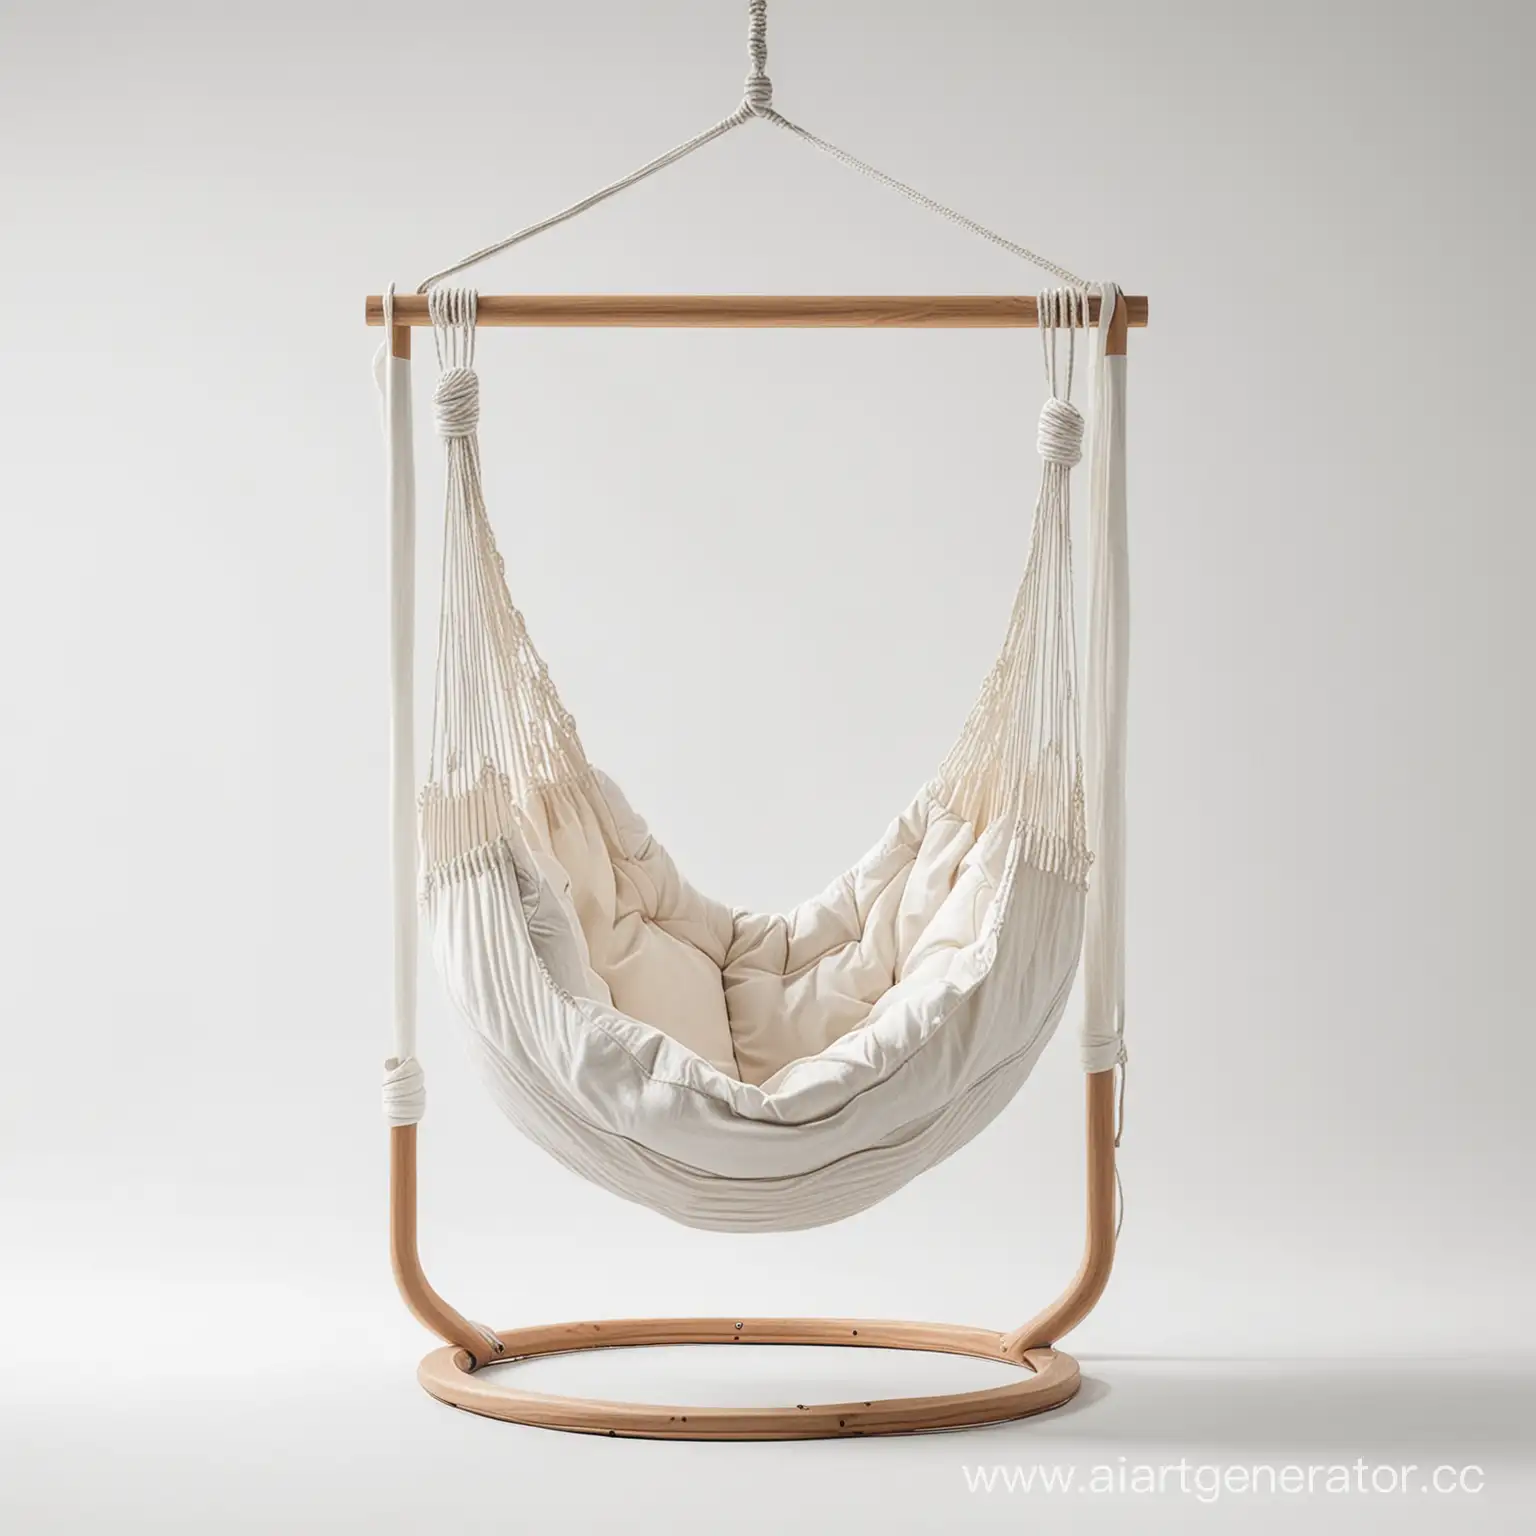 Contemporary-Hanging-Hammock-on-White-Background